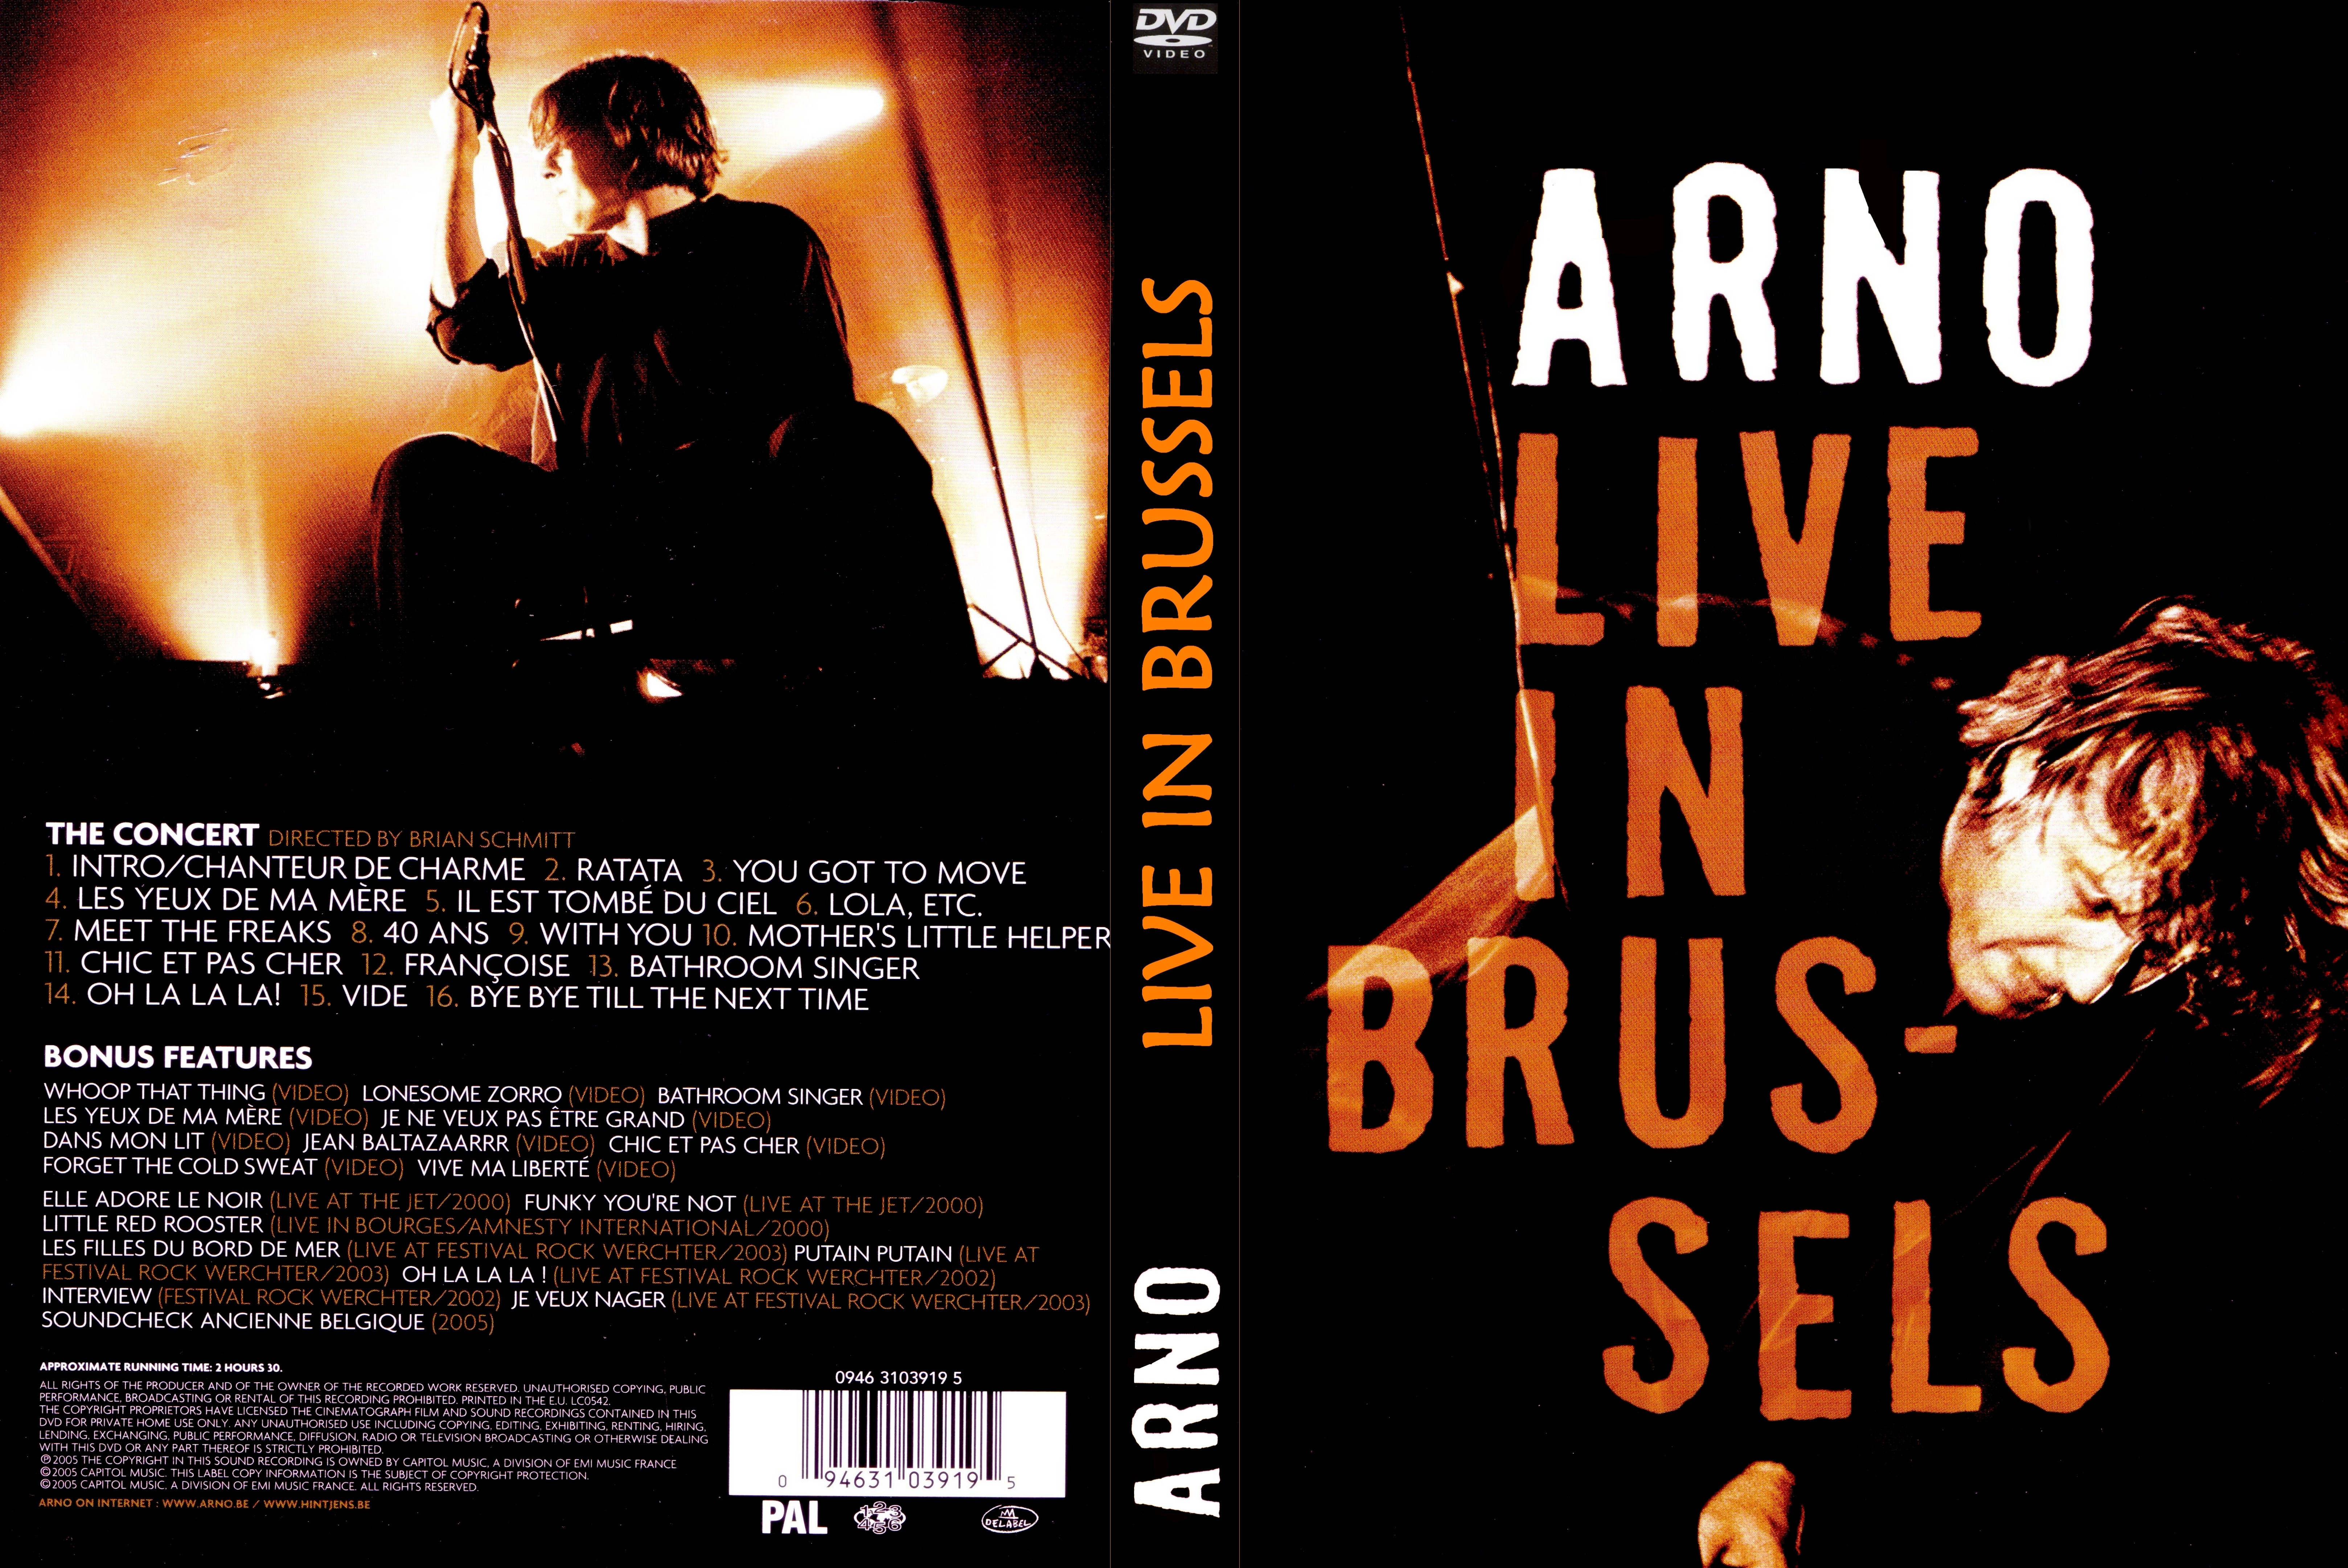 Jaquette DVD Arno - Live in Brussels